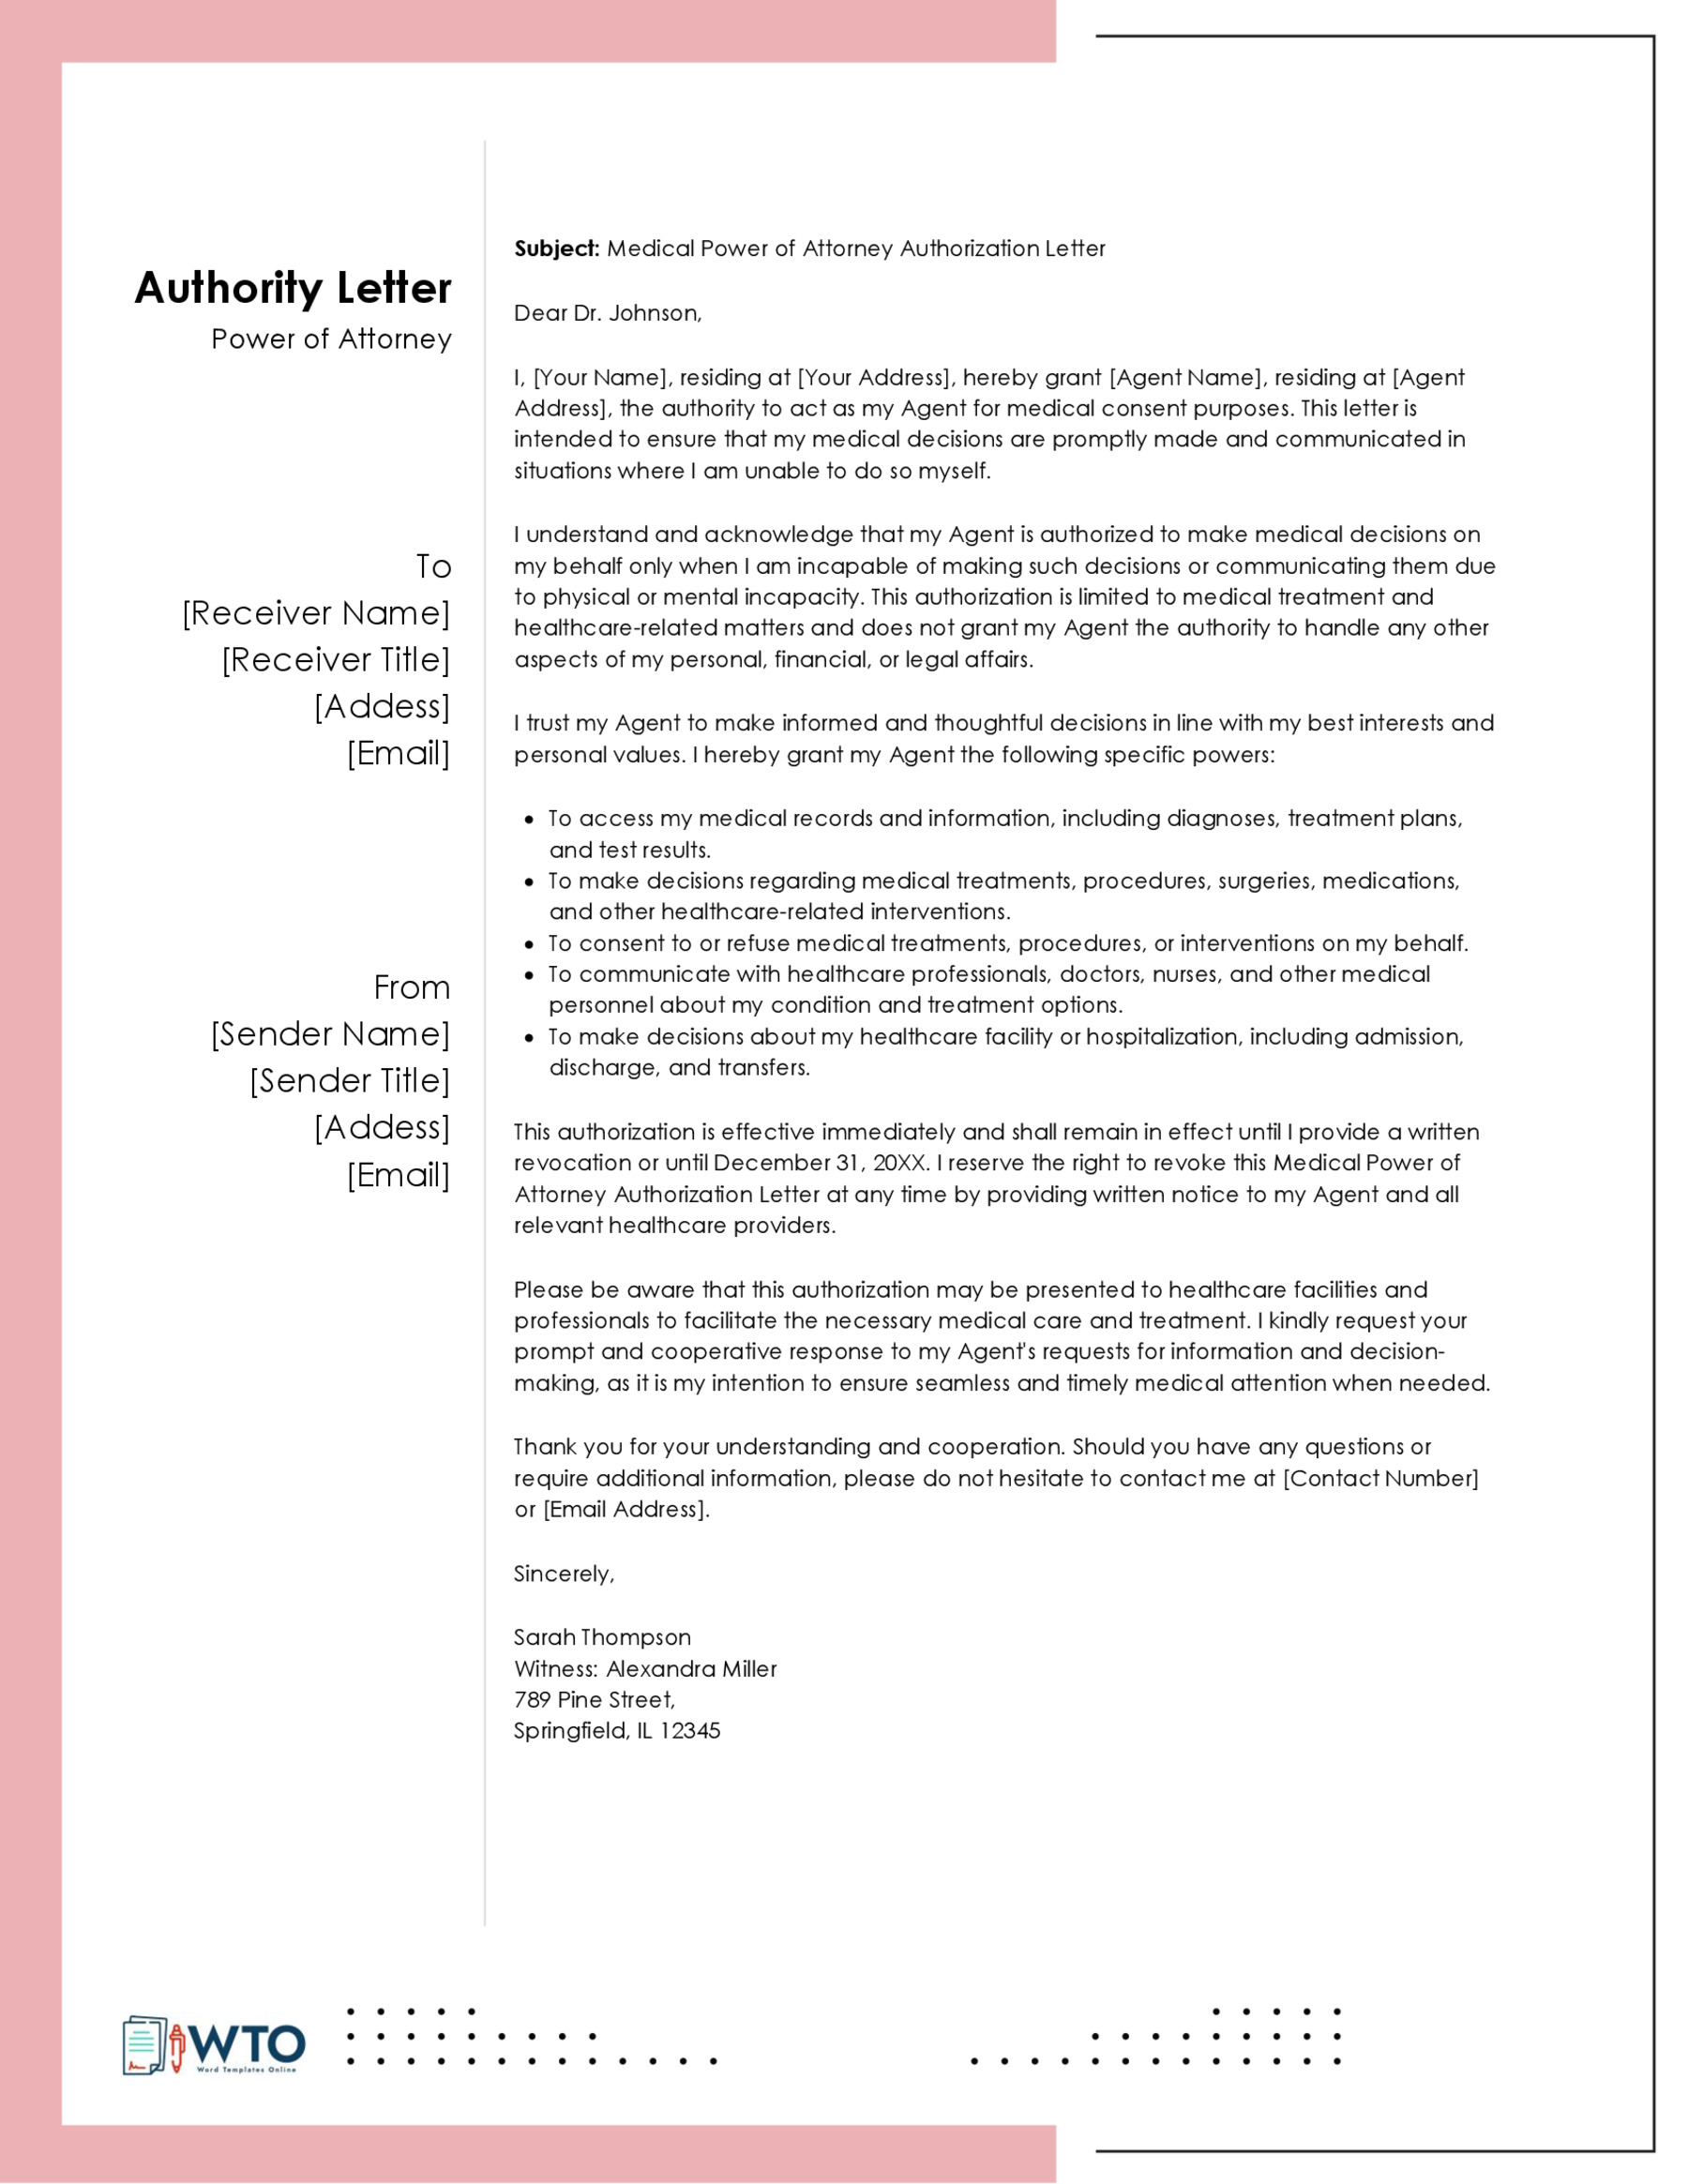 Printable Power of Attorney Authorization Letter Template 06 for Word